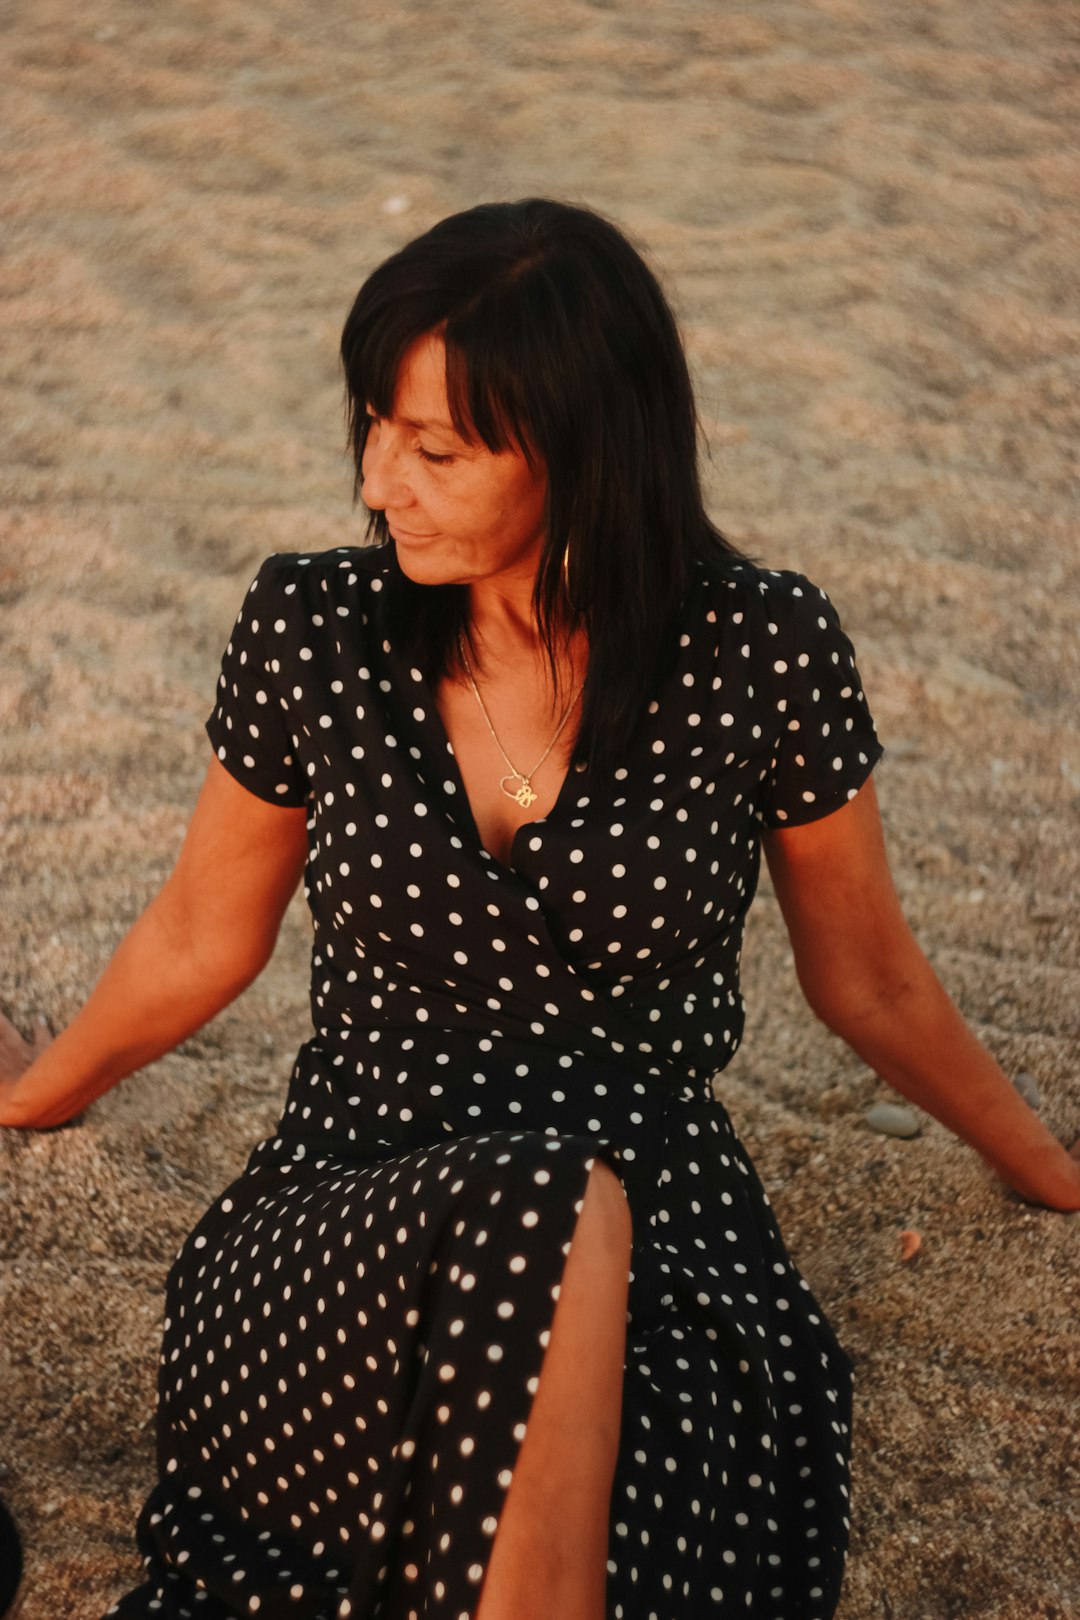 woman in black and white polka dot dress sitting on brown sand during daytime